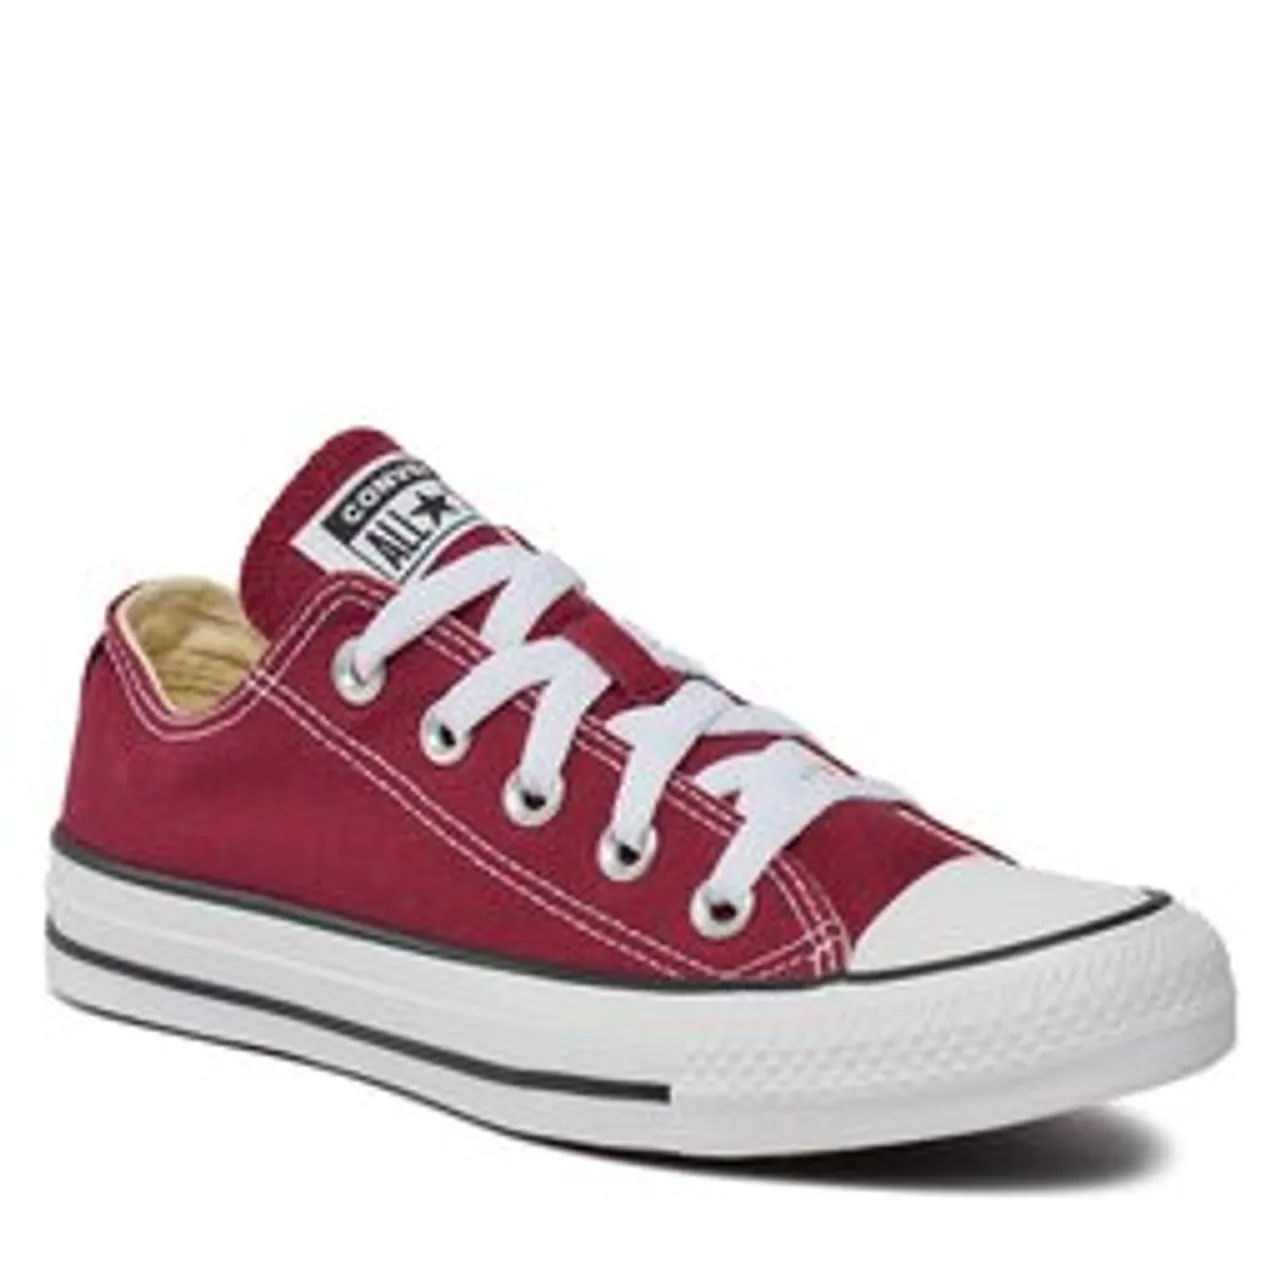 Sneakers aus Stoff Converse All Star Ox M9691C Maroon